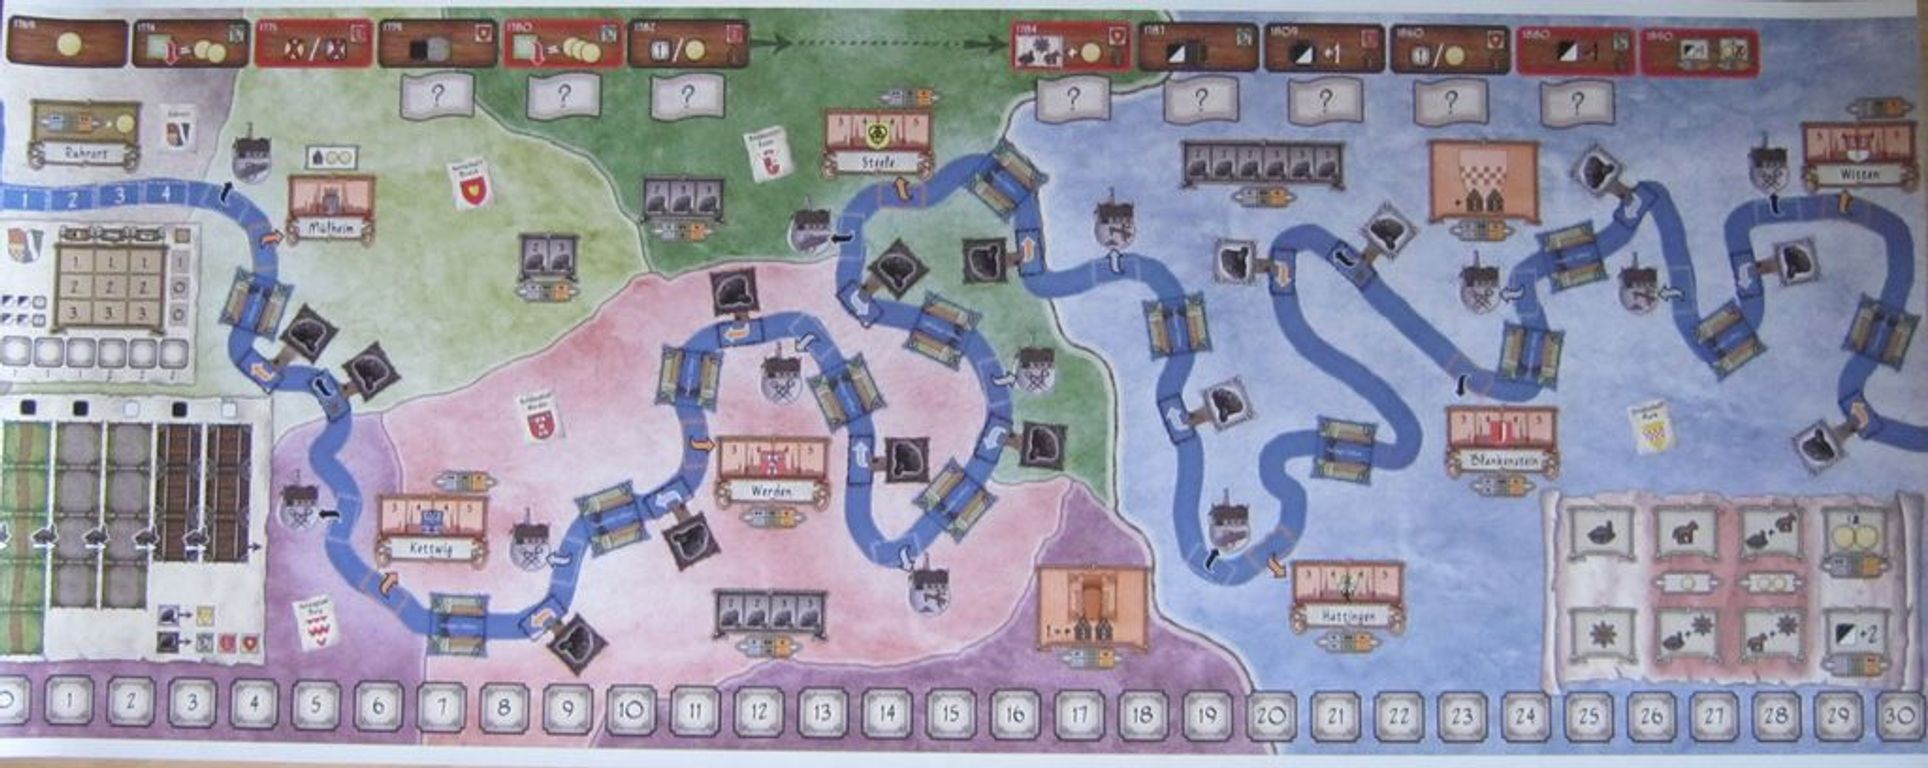 The Ruhr: A Story of Coal Trade game board